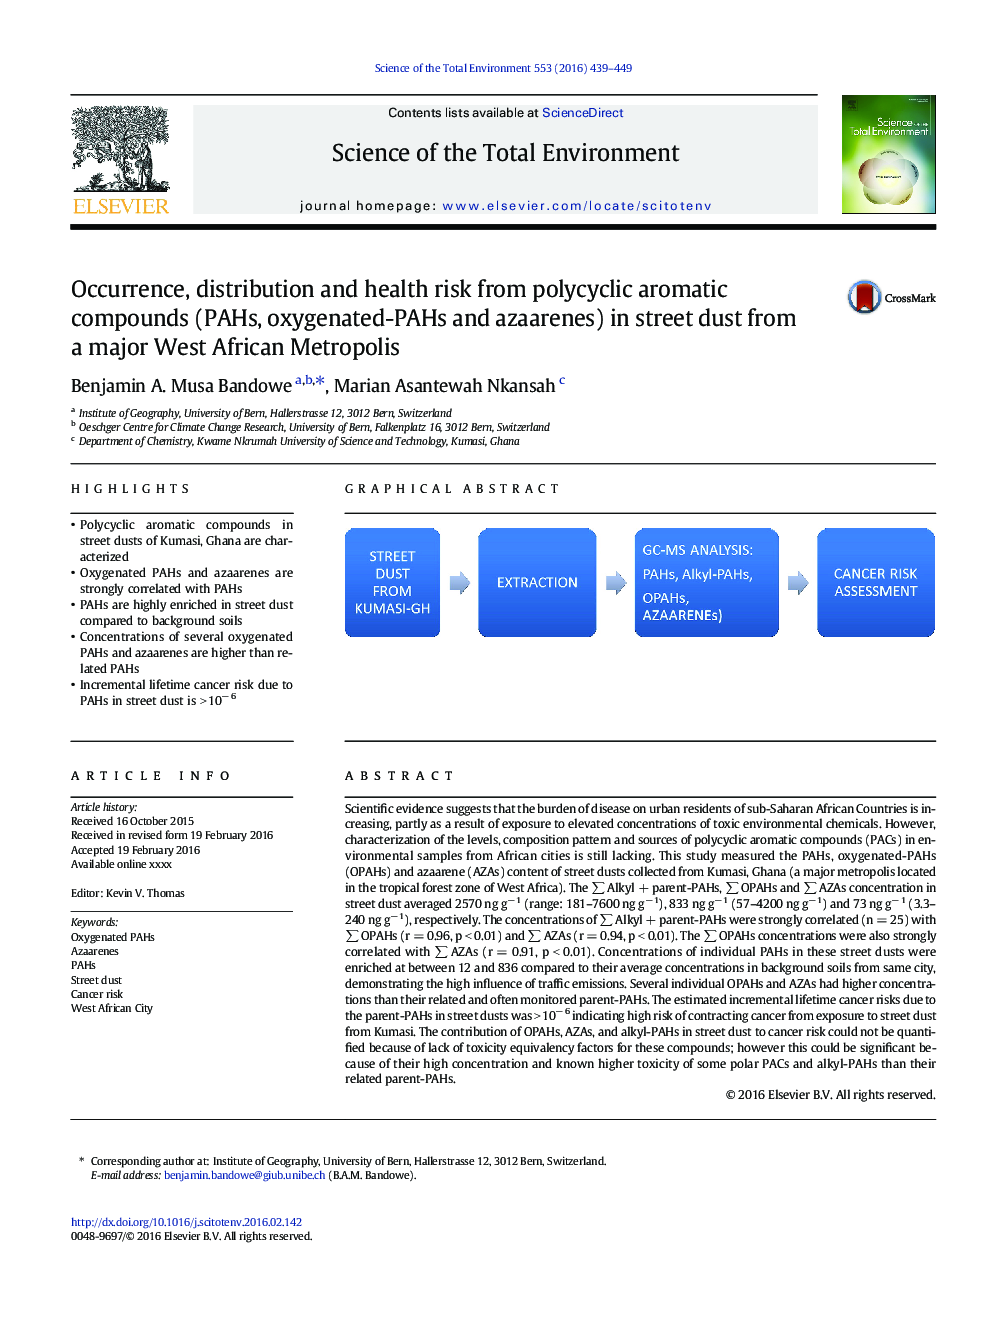 Occurrence, distribution and health risk from polycyclic aromatic compounds (PAHs, oxygenated-PAHs and azaarenes) in street dust from a major West African Metropolis